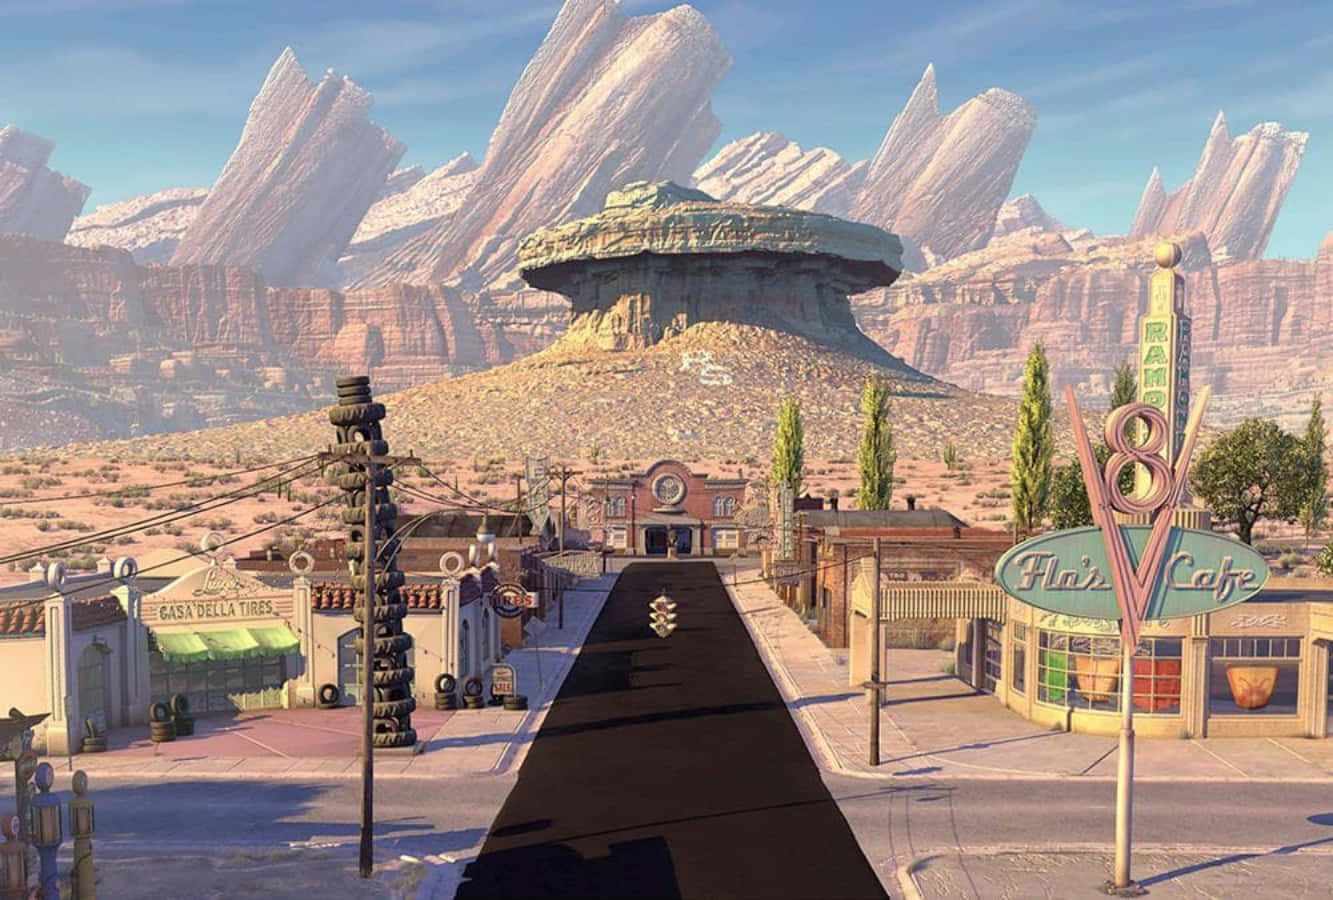 Explore Radiator Springs and find fun, adventure, and beauty! Wallpaper